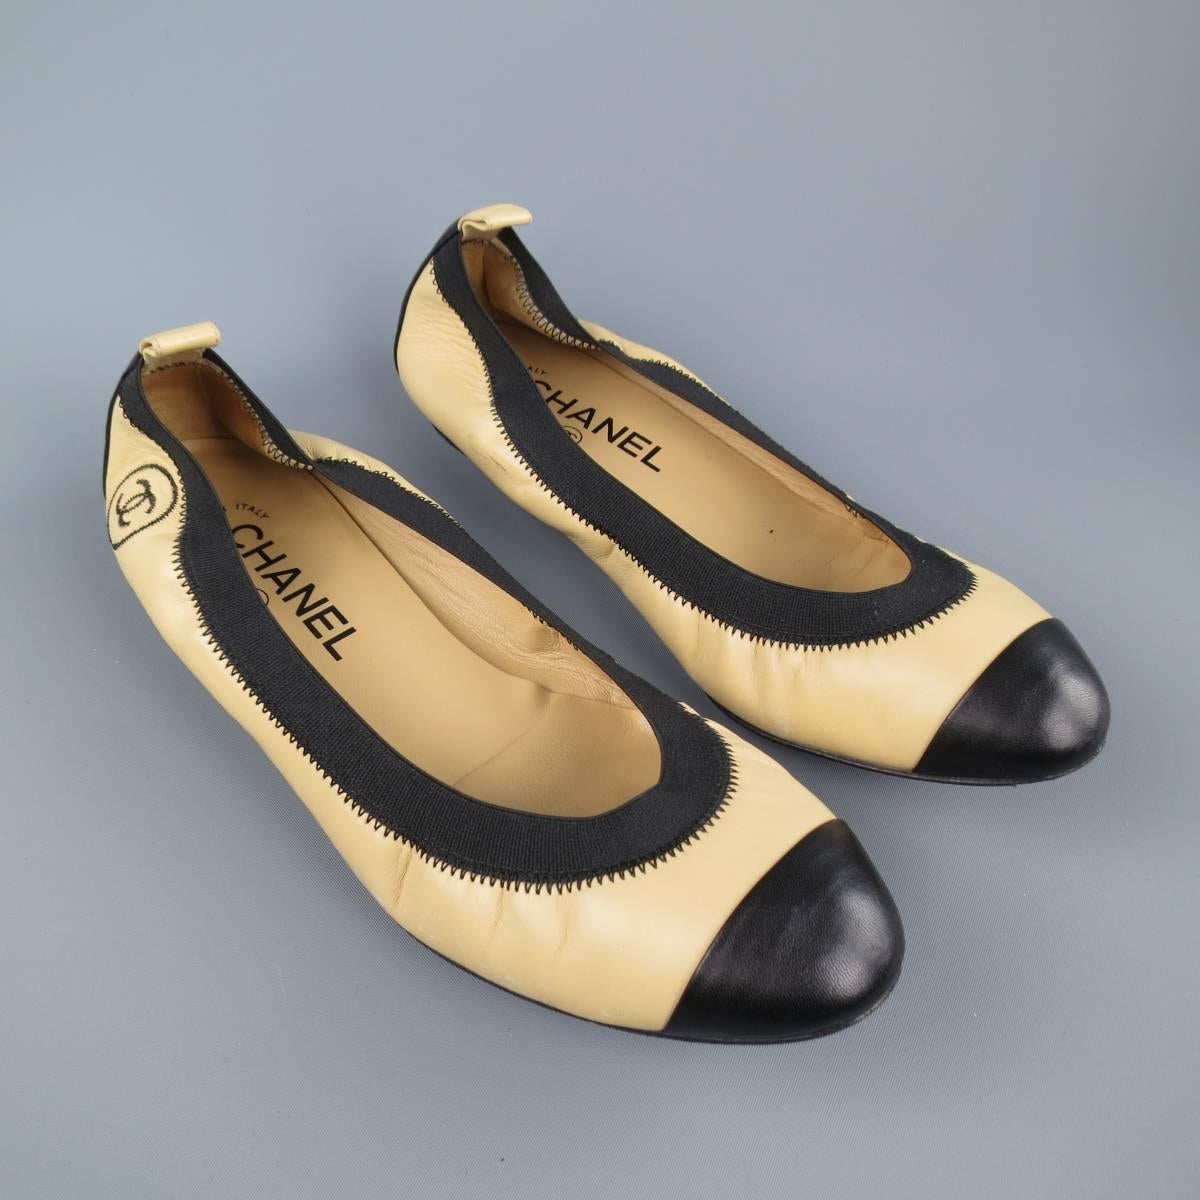 CHANEL beige and black leather toe cap ballet flats feature an elasticized topline, and signature embroidered 'CC